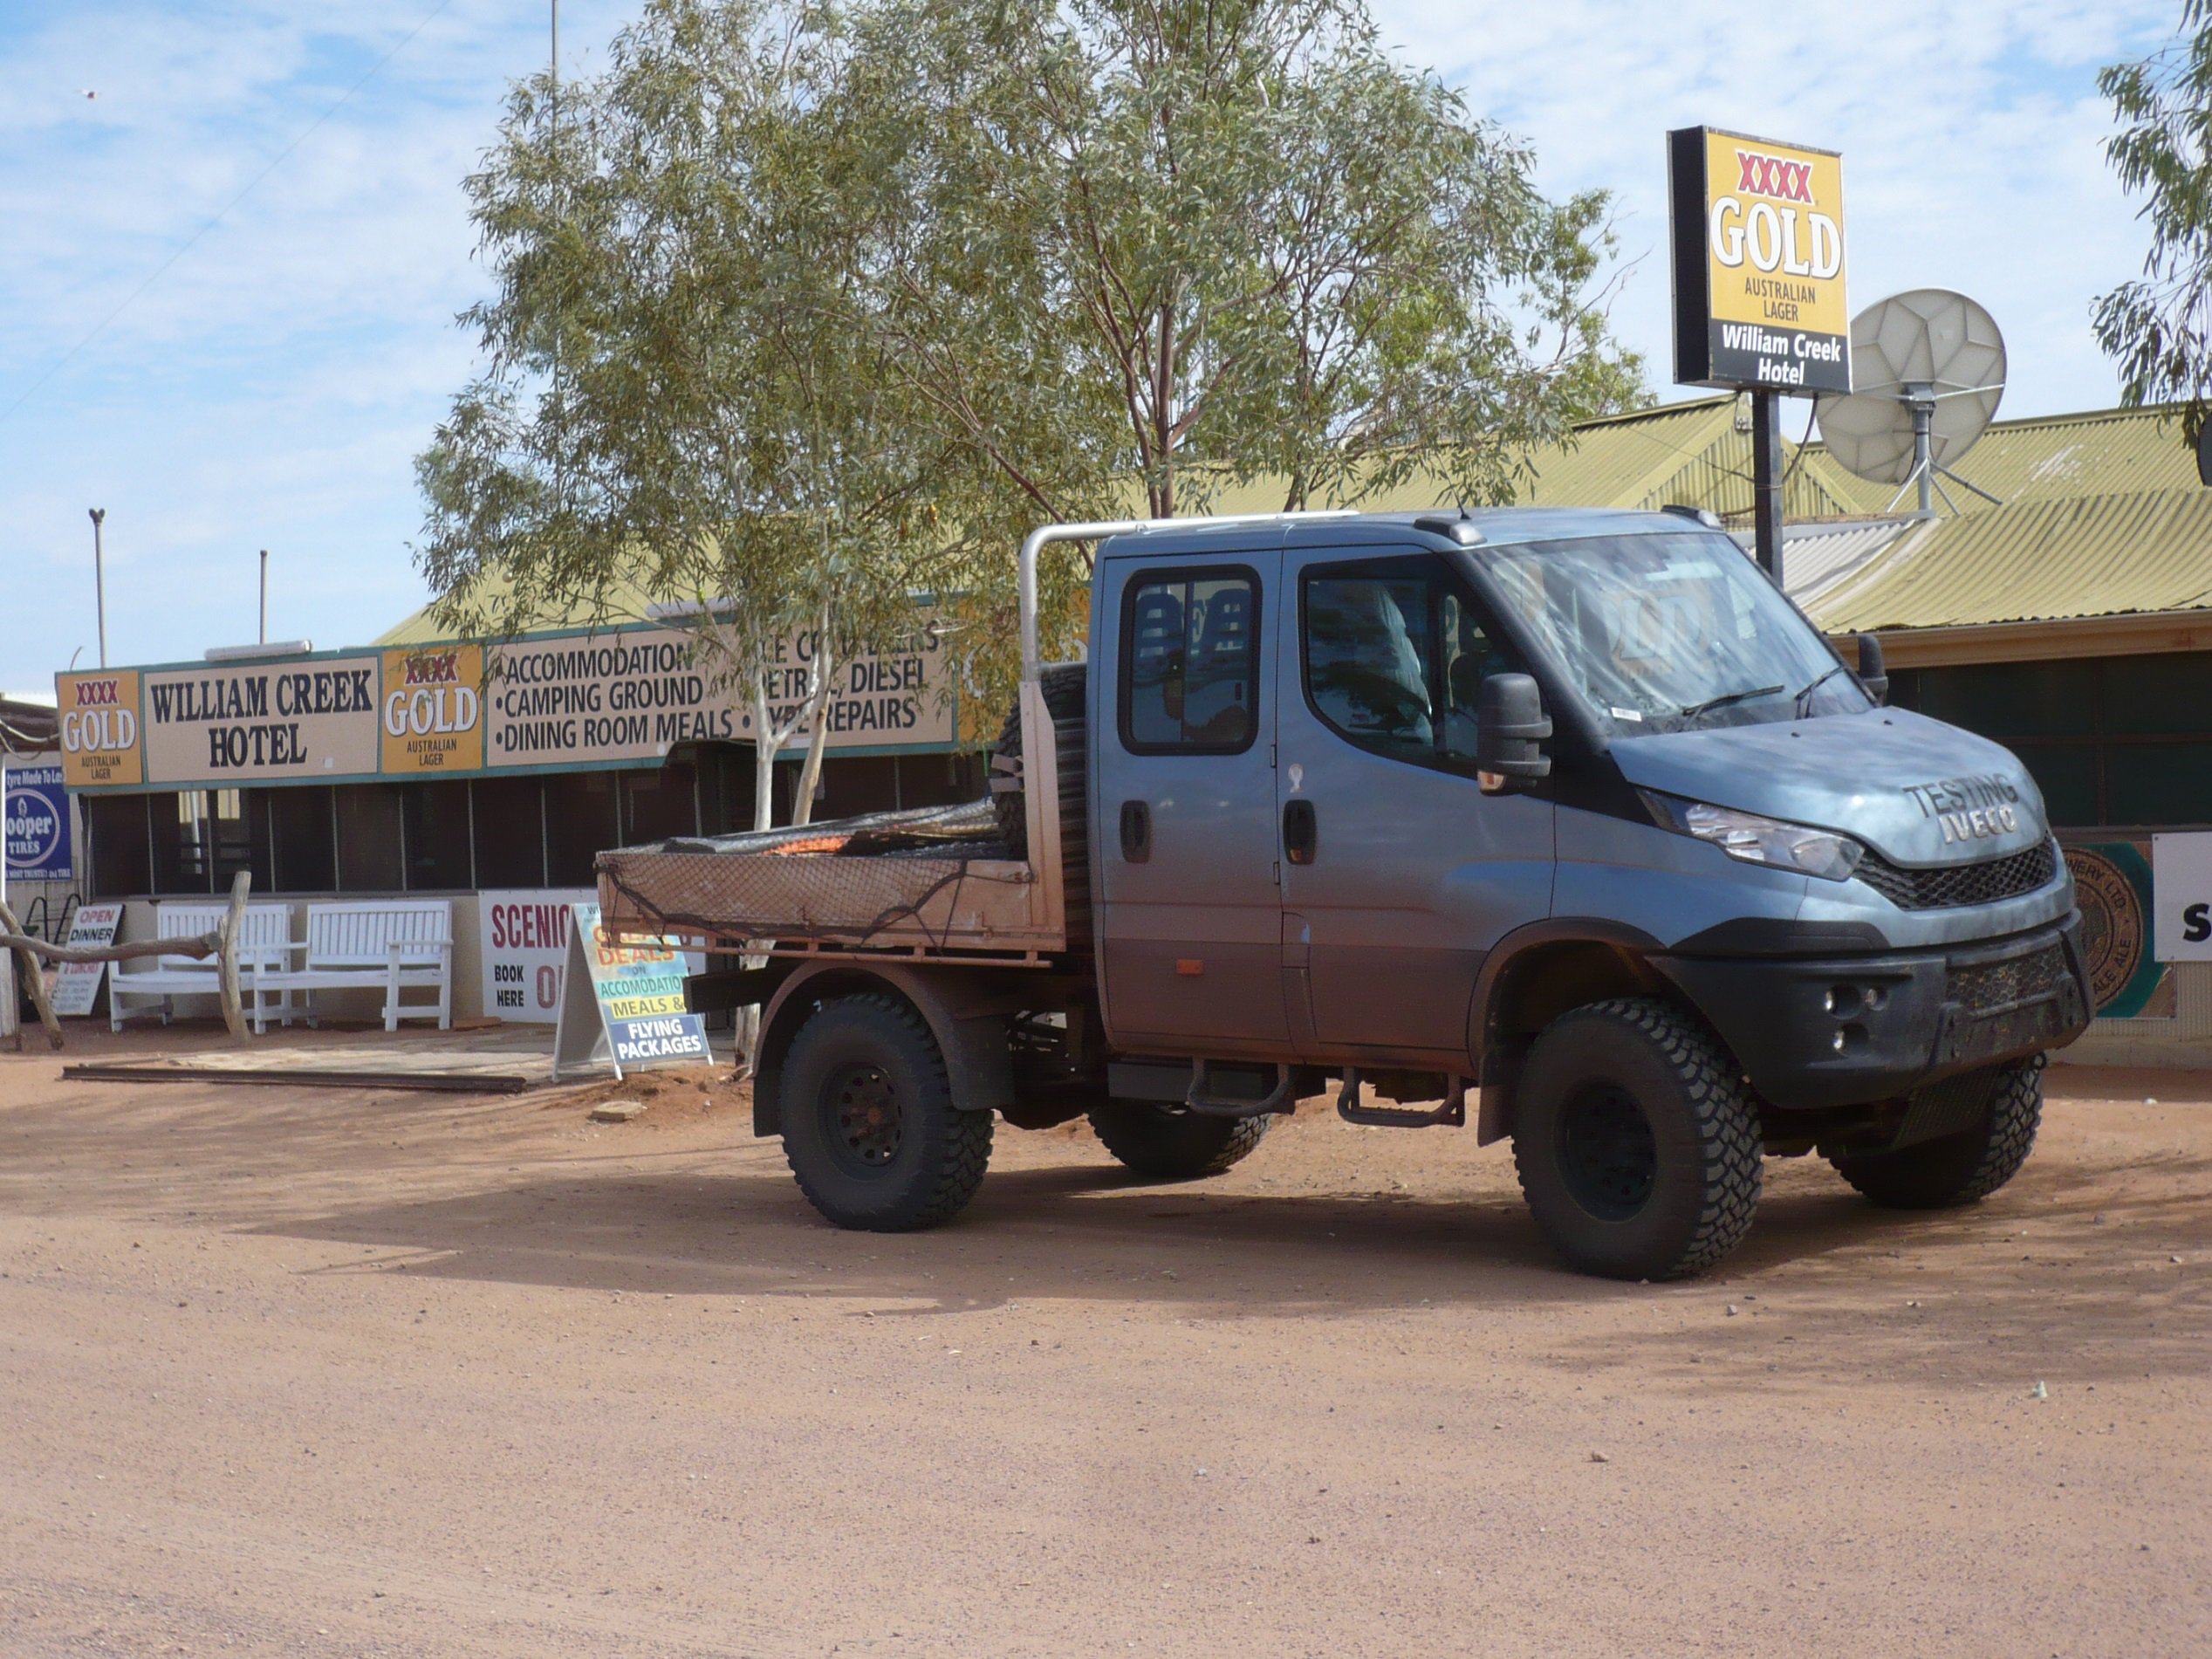 2016 Iveco Daily 4x4 Rigorous Outback Testing Completed Ahead Of